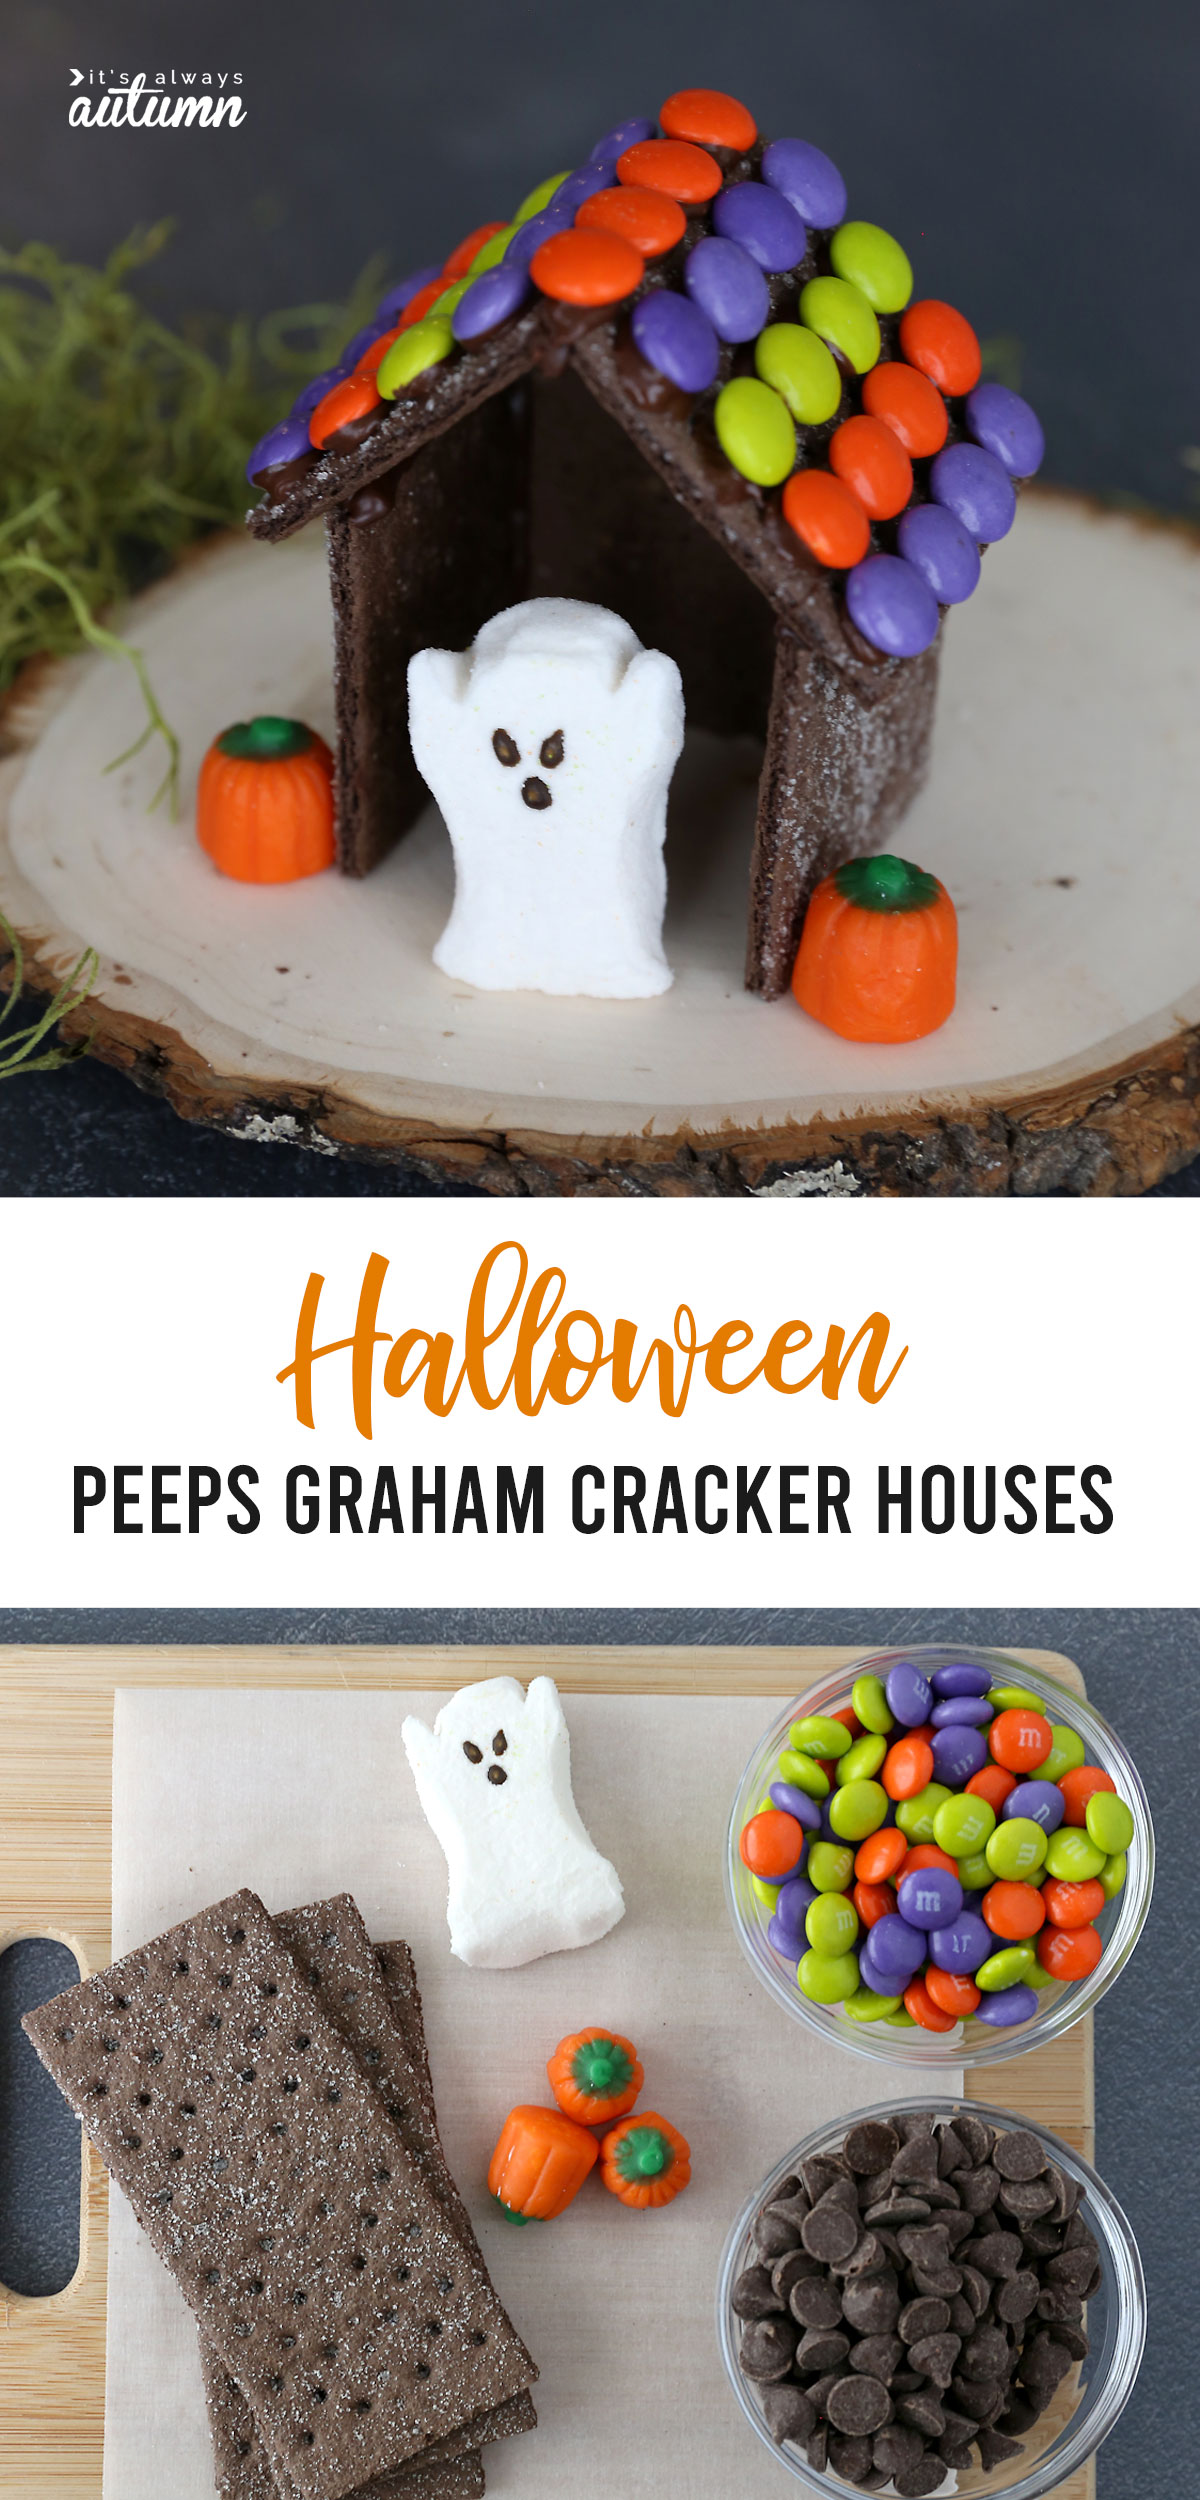 This is the absolute easiest way to make Halloween gingerbread houses - use chocolate graham crackers!